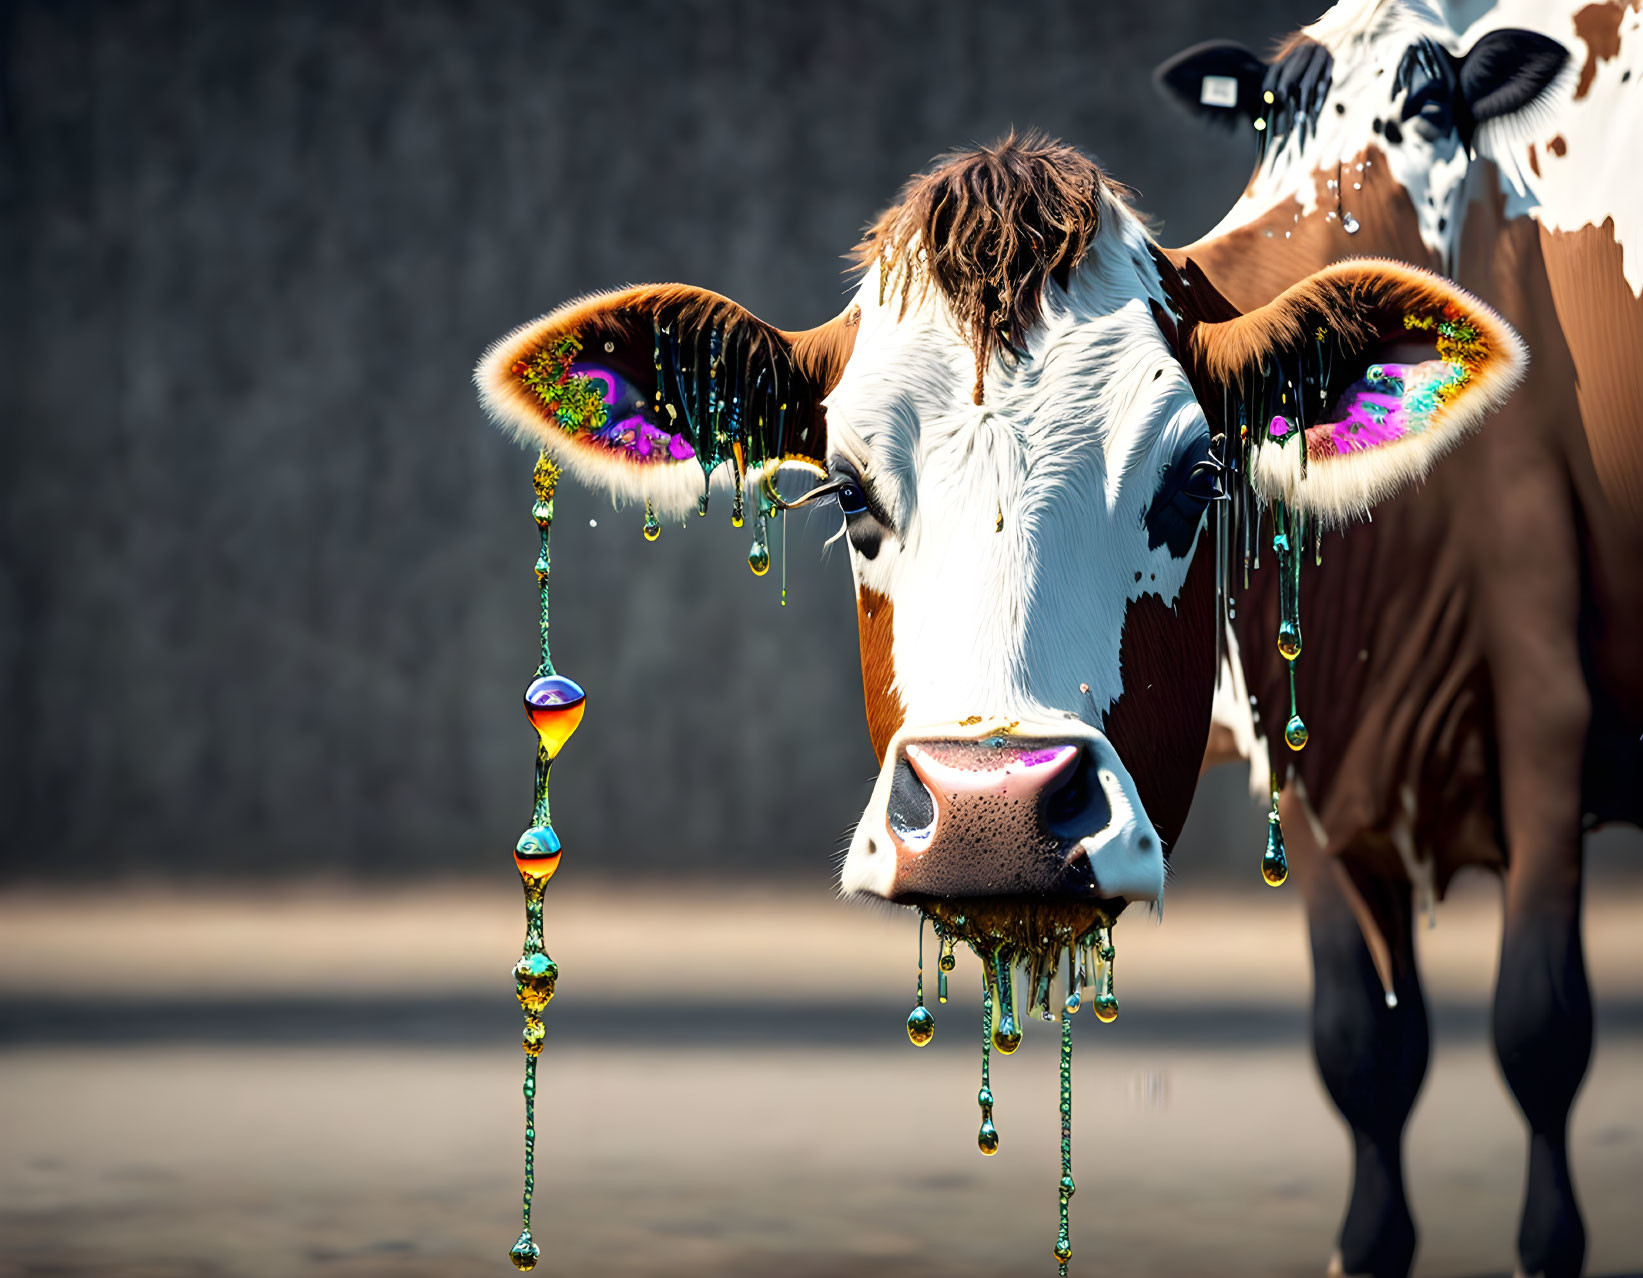 Colorful Paint Dripping on Cow's Horns in Blurred Background